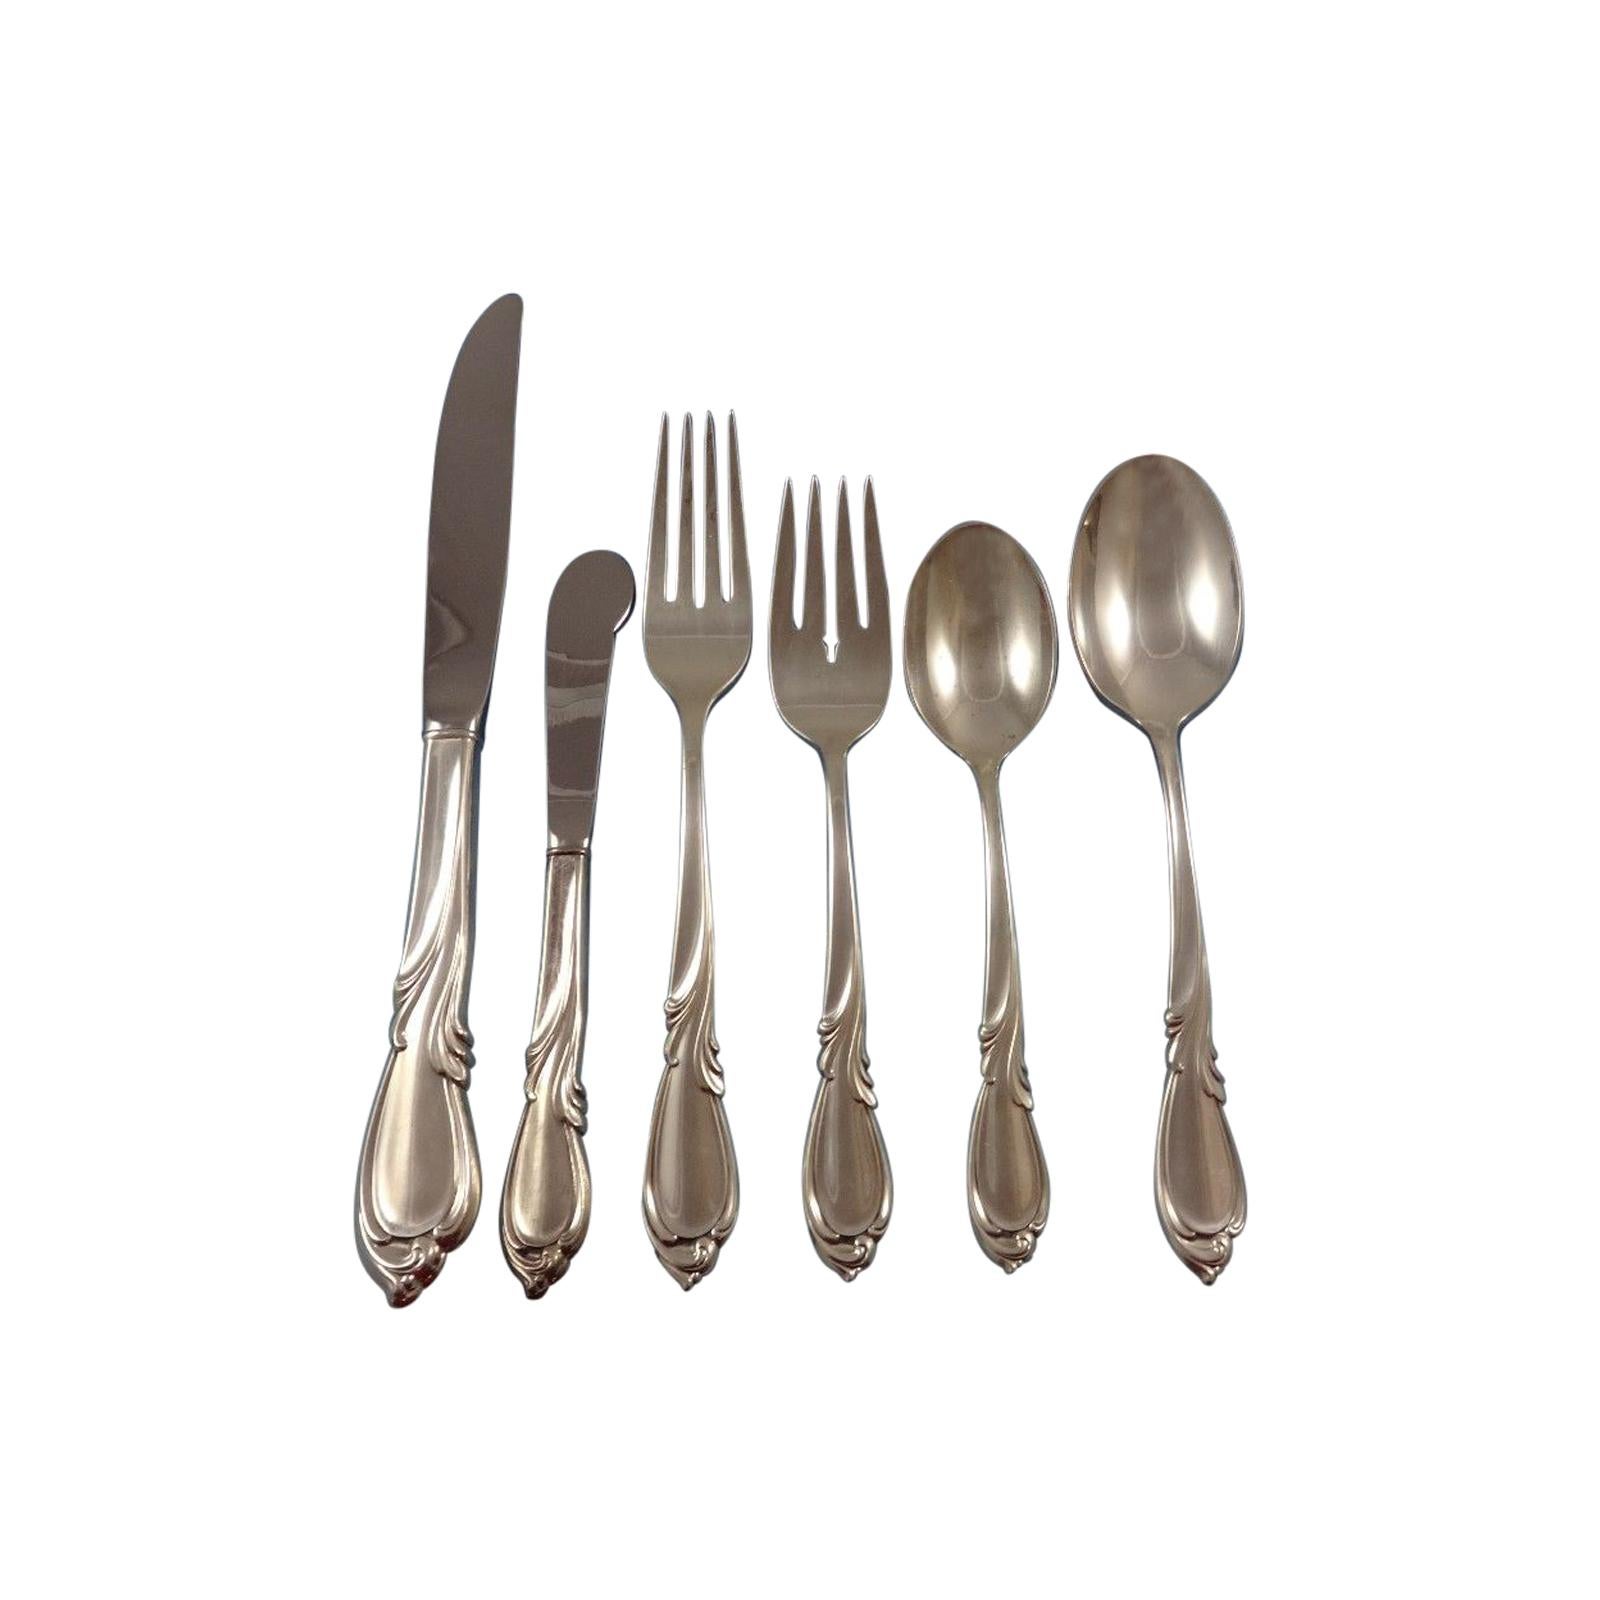 Rhapsody by International Sterling Silver Flatware Service for 12 - 80 pieces